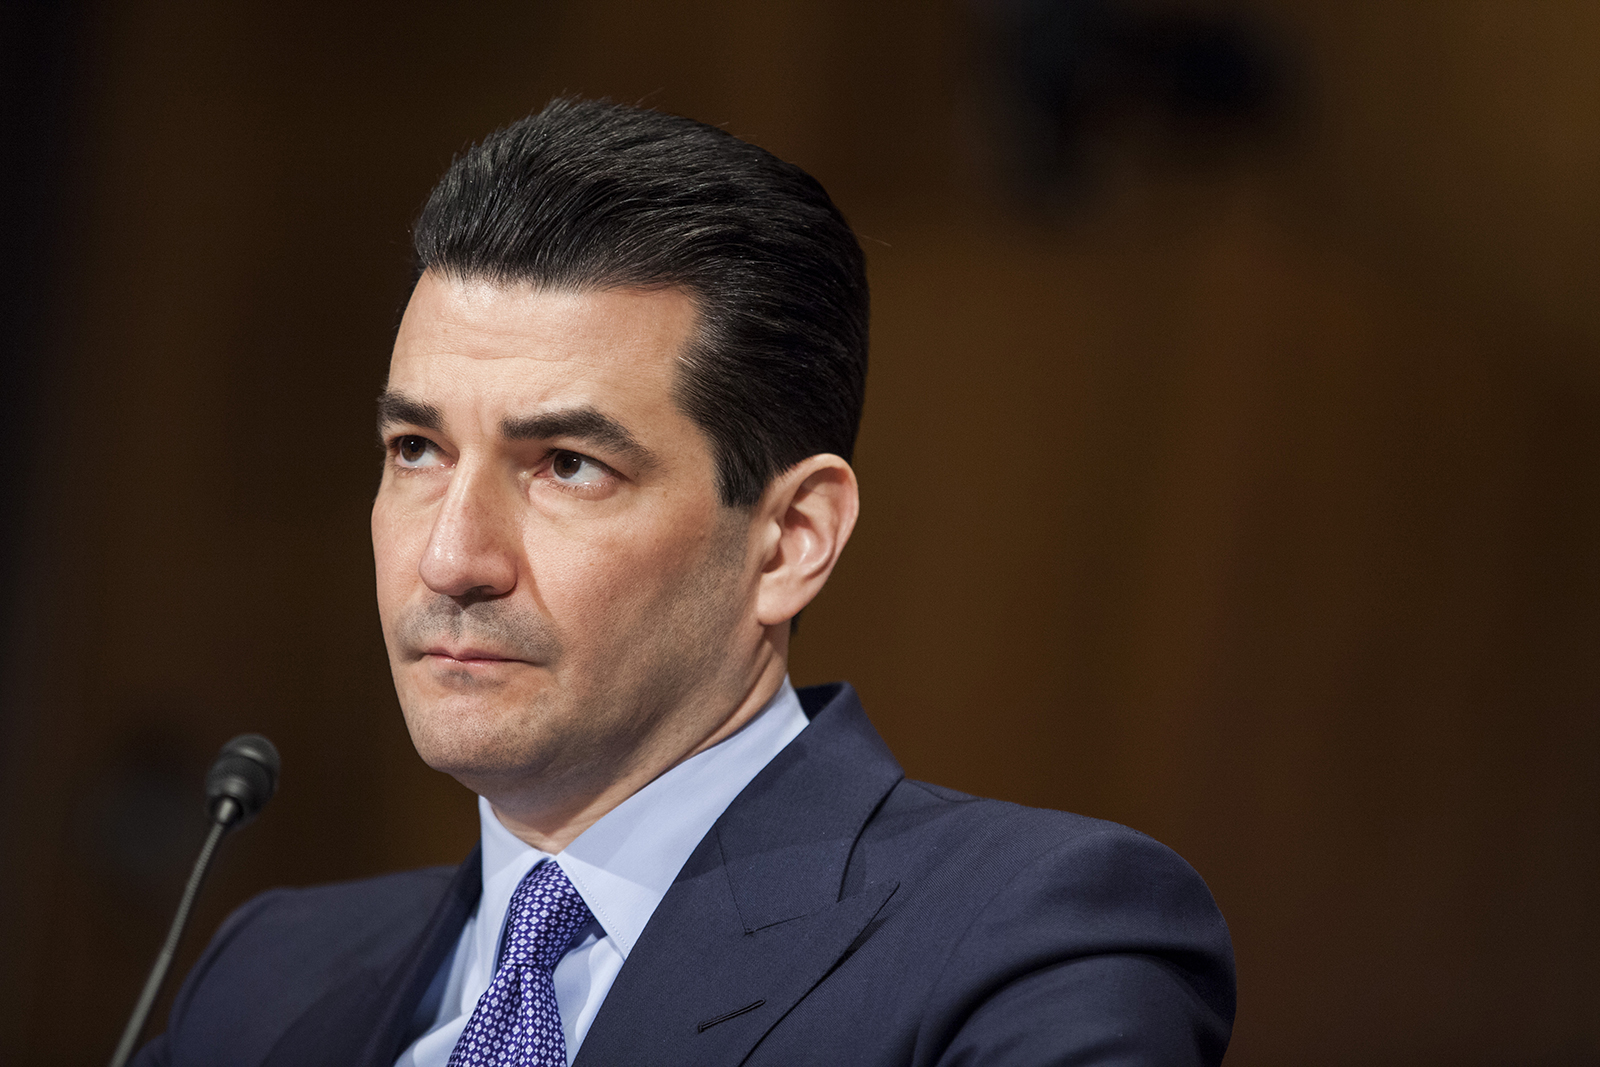 Dr. Scott Gottlieb testifies during a Senate Health, Education, Labor and Pensions Committee hearing on April 5, 2017 on Capitol Hill in Washington.